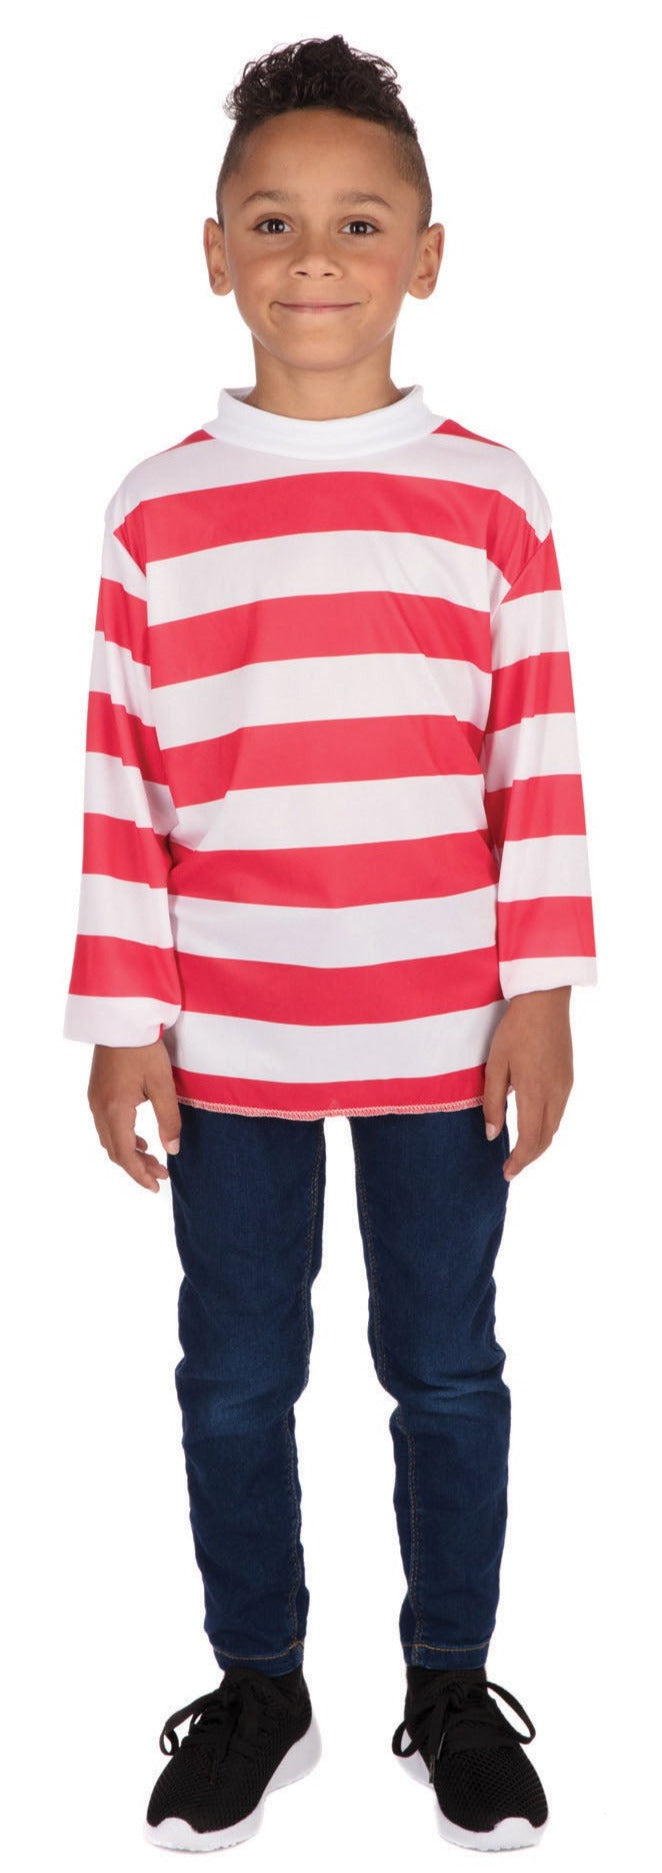 Red/White Striped Top - M